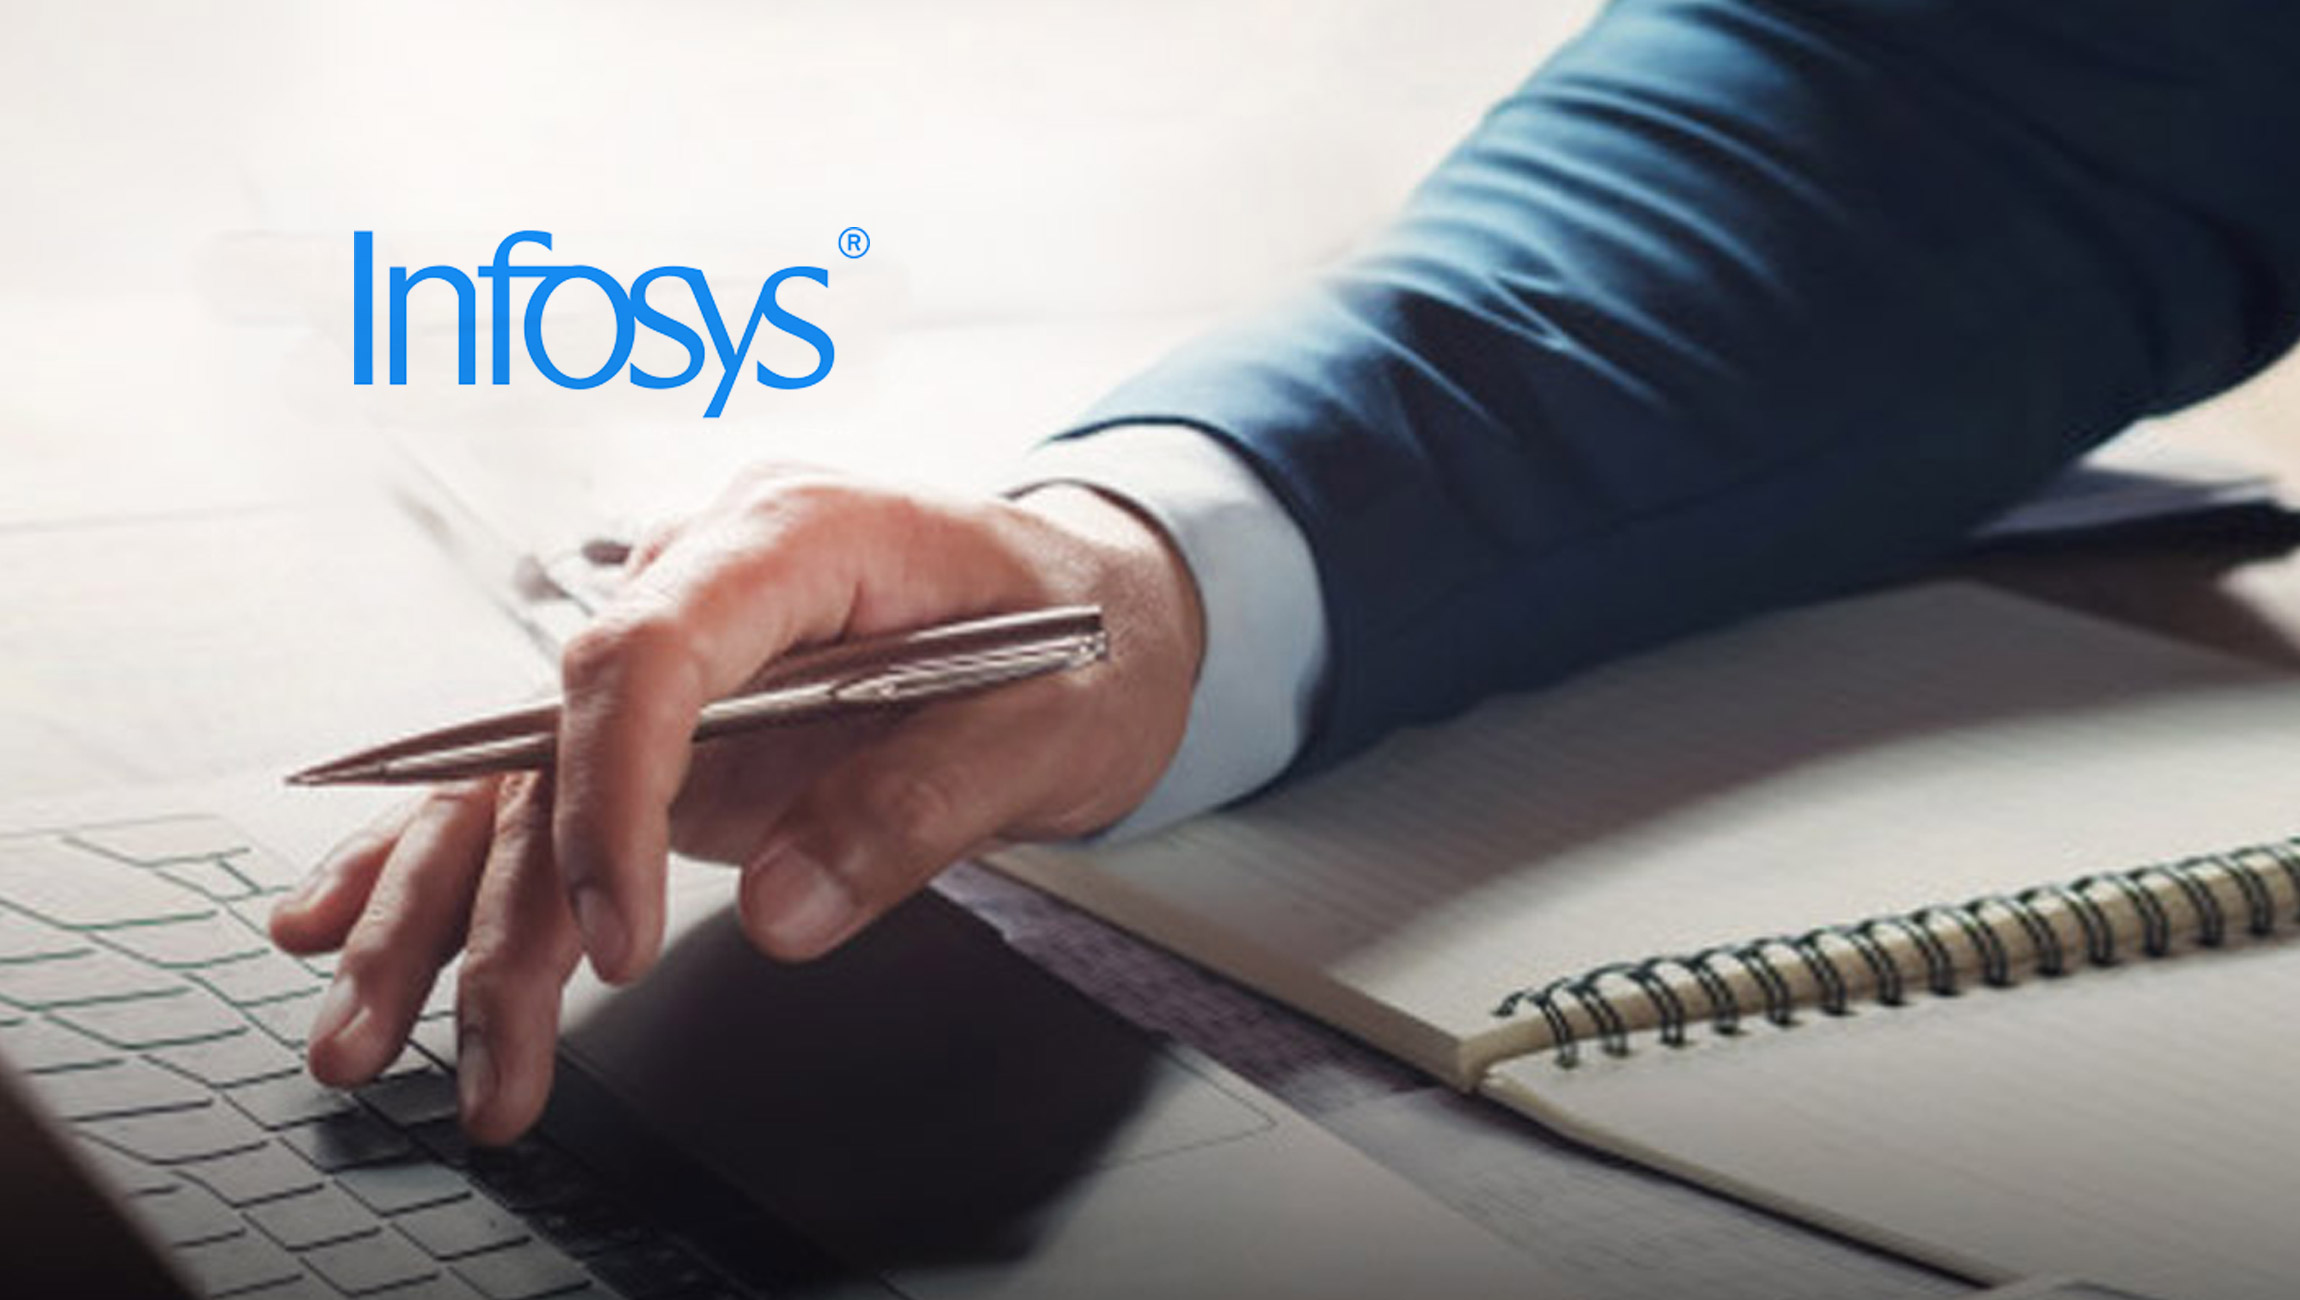 Infosys BPM to Hire 400 Skilled Workers in Costa Rica by 2022 to Power Regional Business Growth